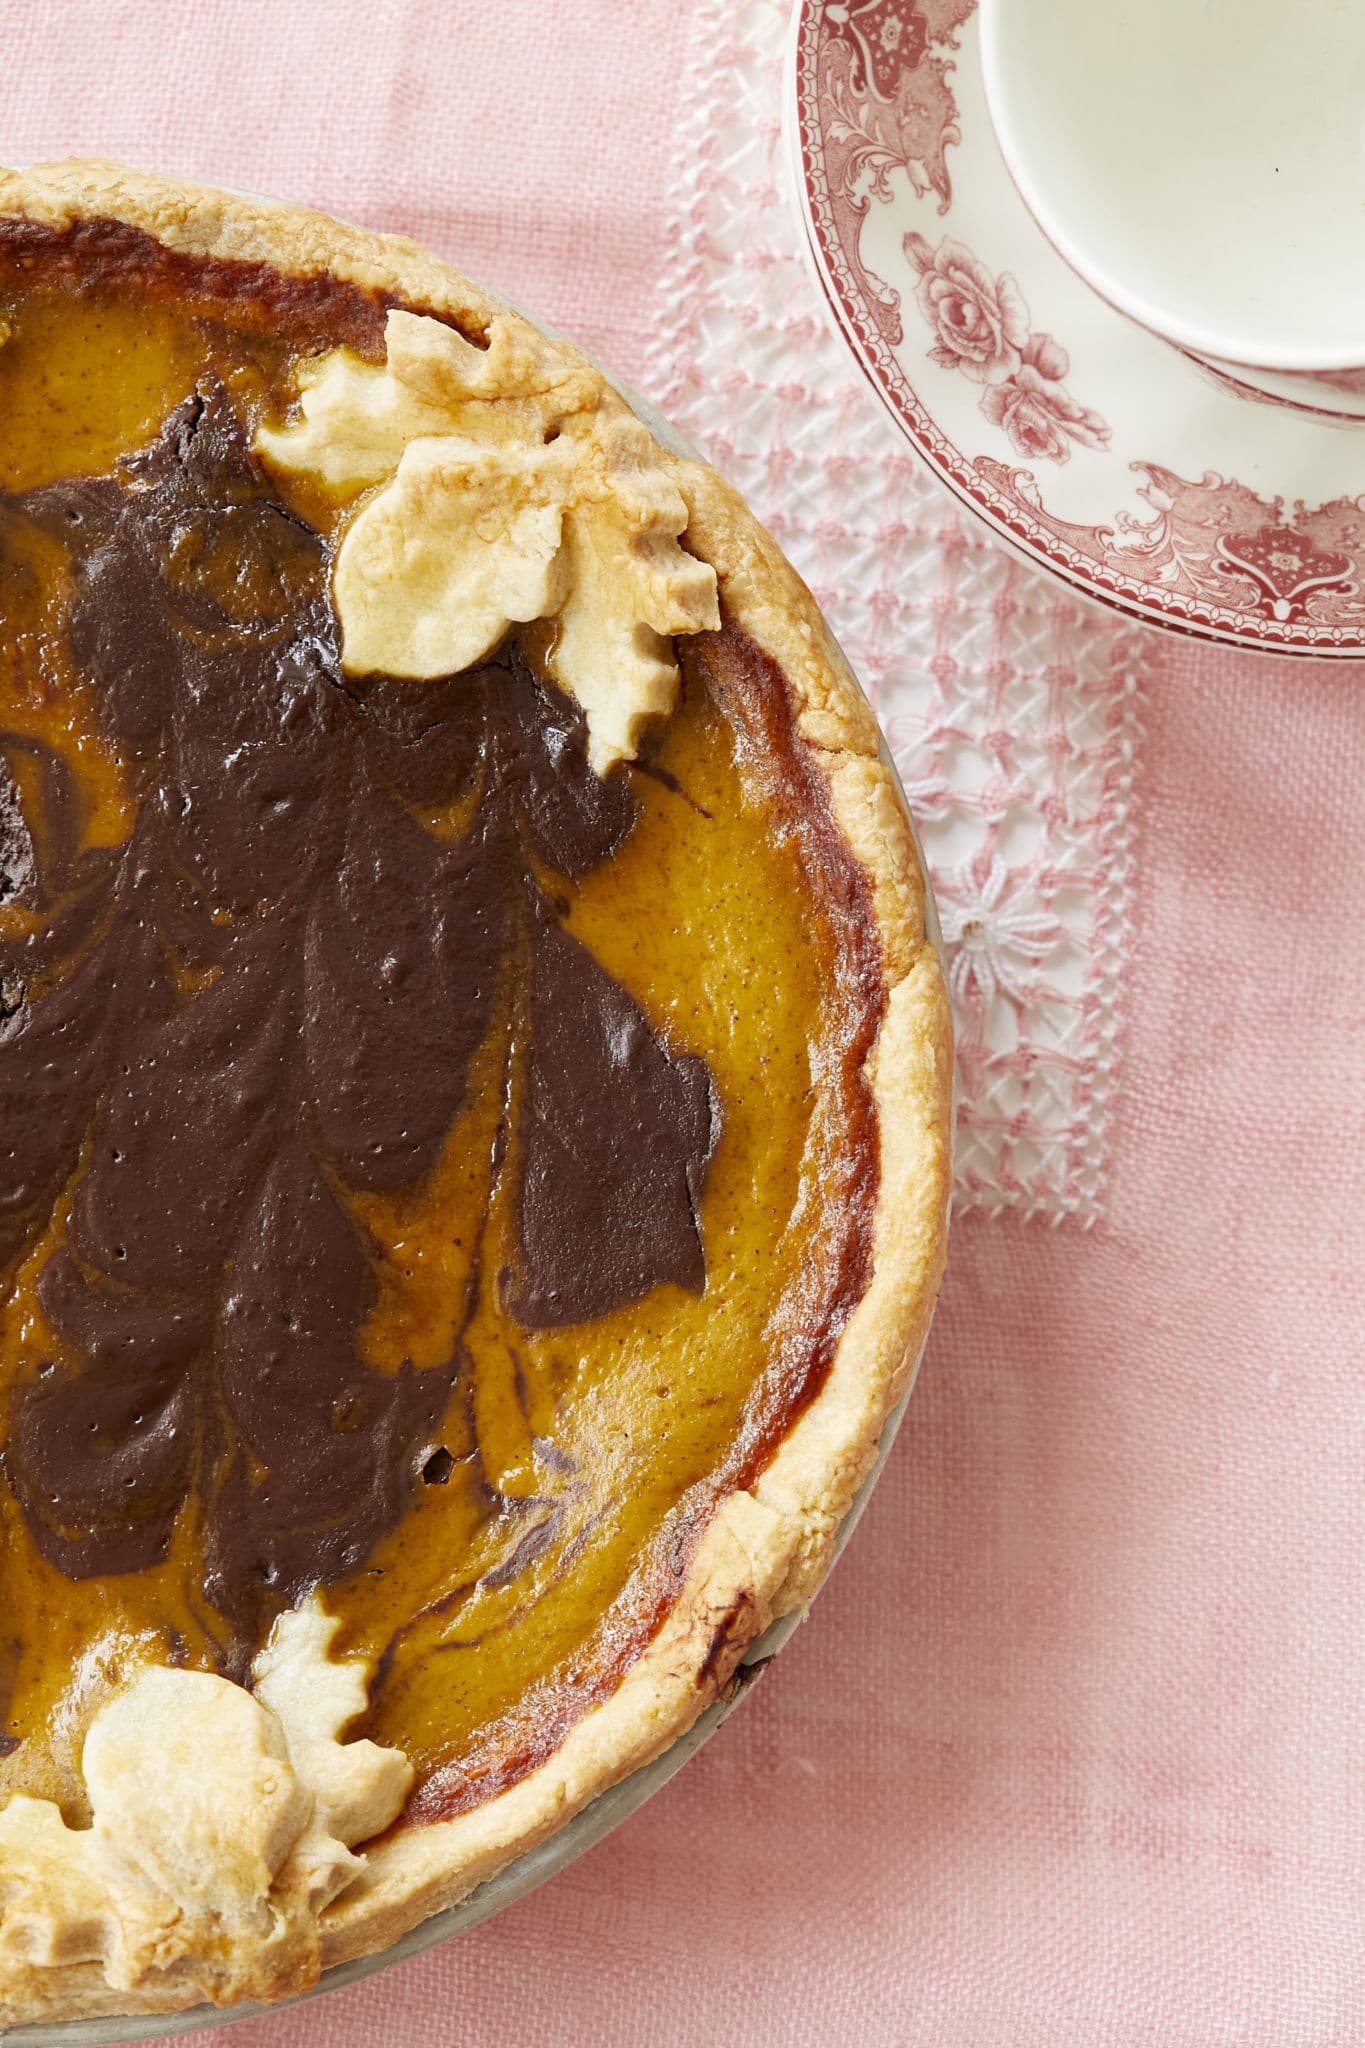 A close-up image of the Chocolate Swirl Pumpkin Pie, taken from over head, shows the semisweet chocolate swirled in with the pumpkin pie filling. The homemade pie crust is light brown and there are leaf-shaped pieces of pie crust.